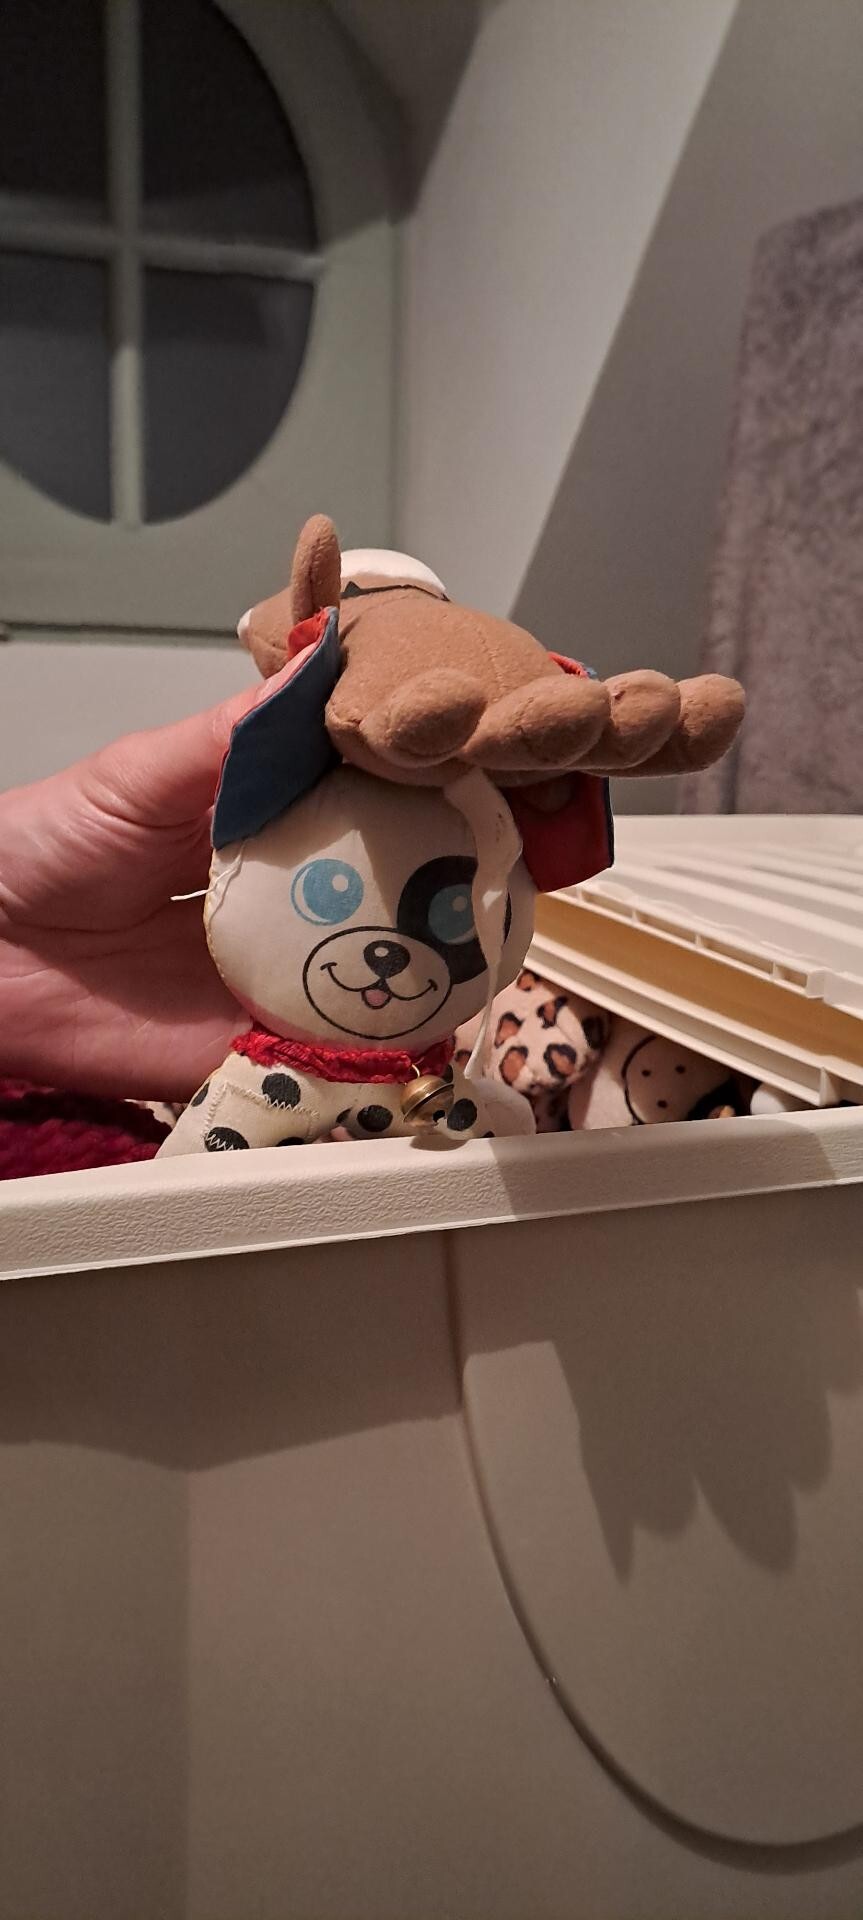 Picture of a plush of mine whose head is sticking out of the box. He is holding his own plush which he is about to throw overboard.